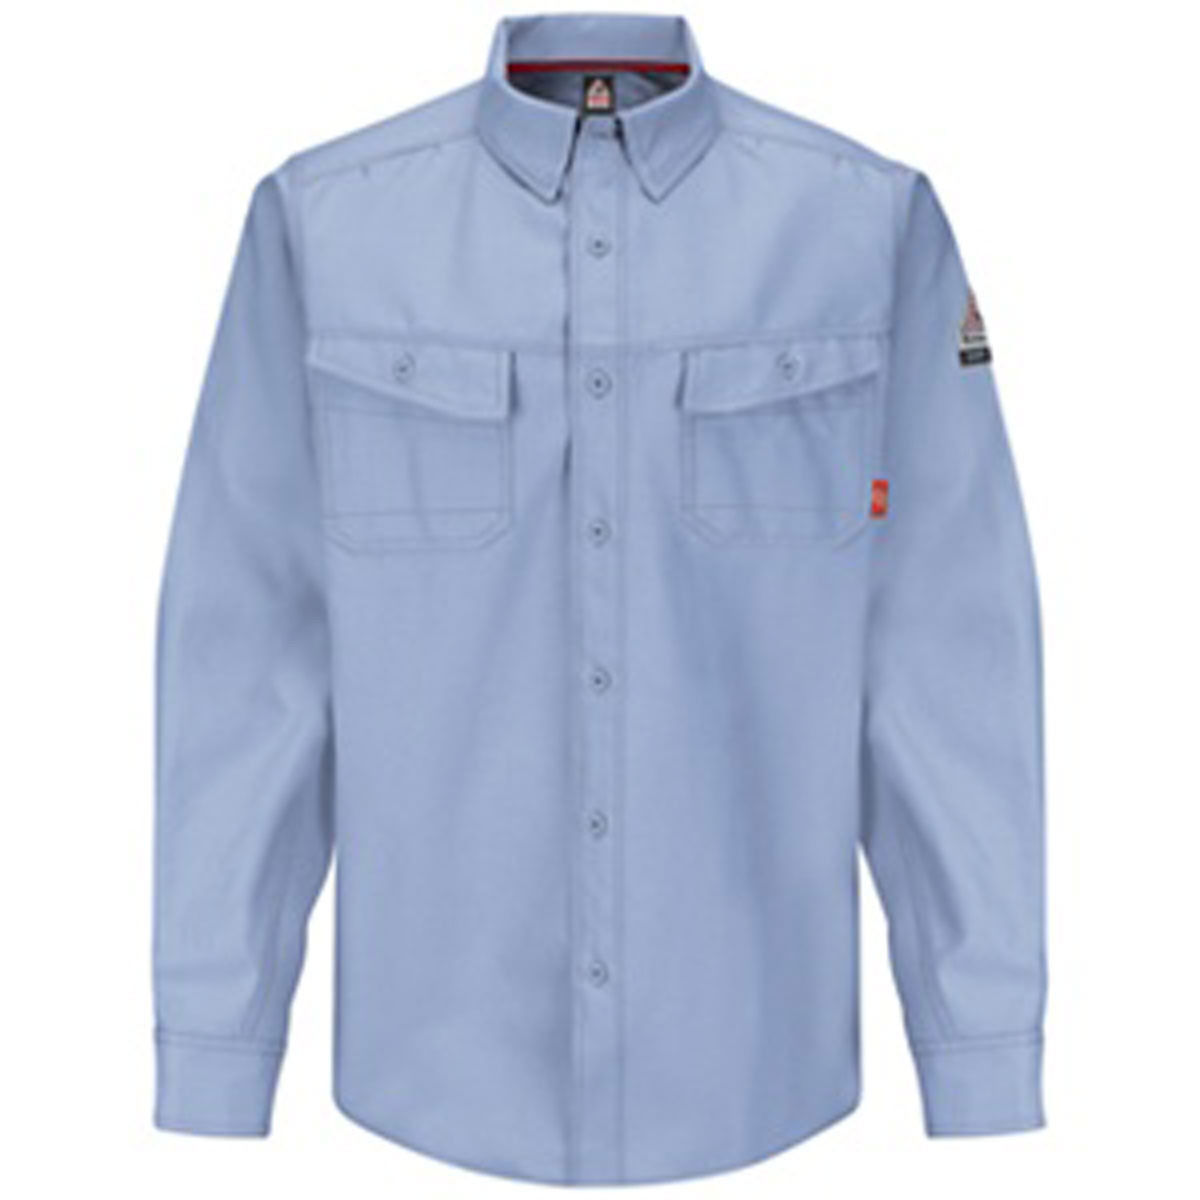 What are the care instructions for Bulwark FR shirts, specifically the iQ Series QS40LB?